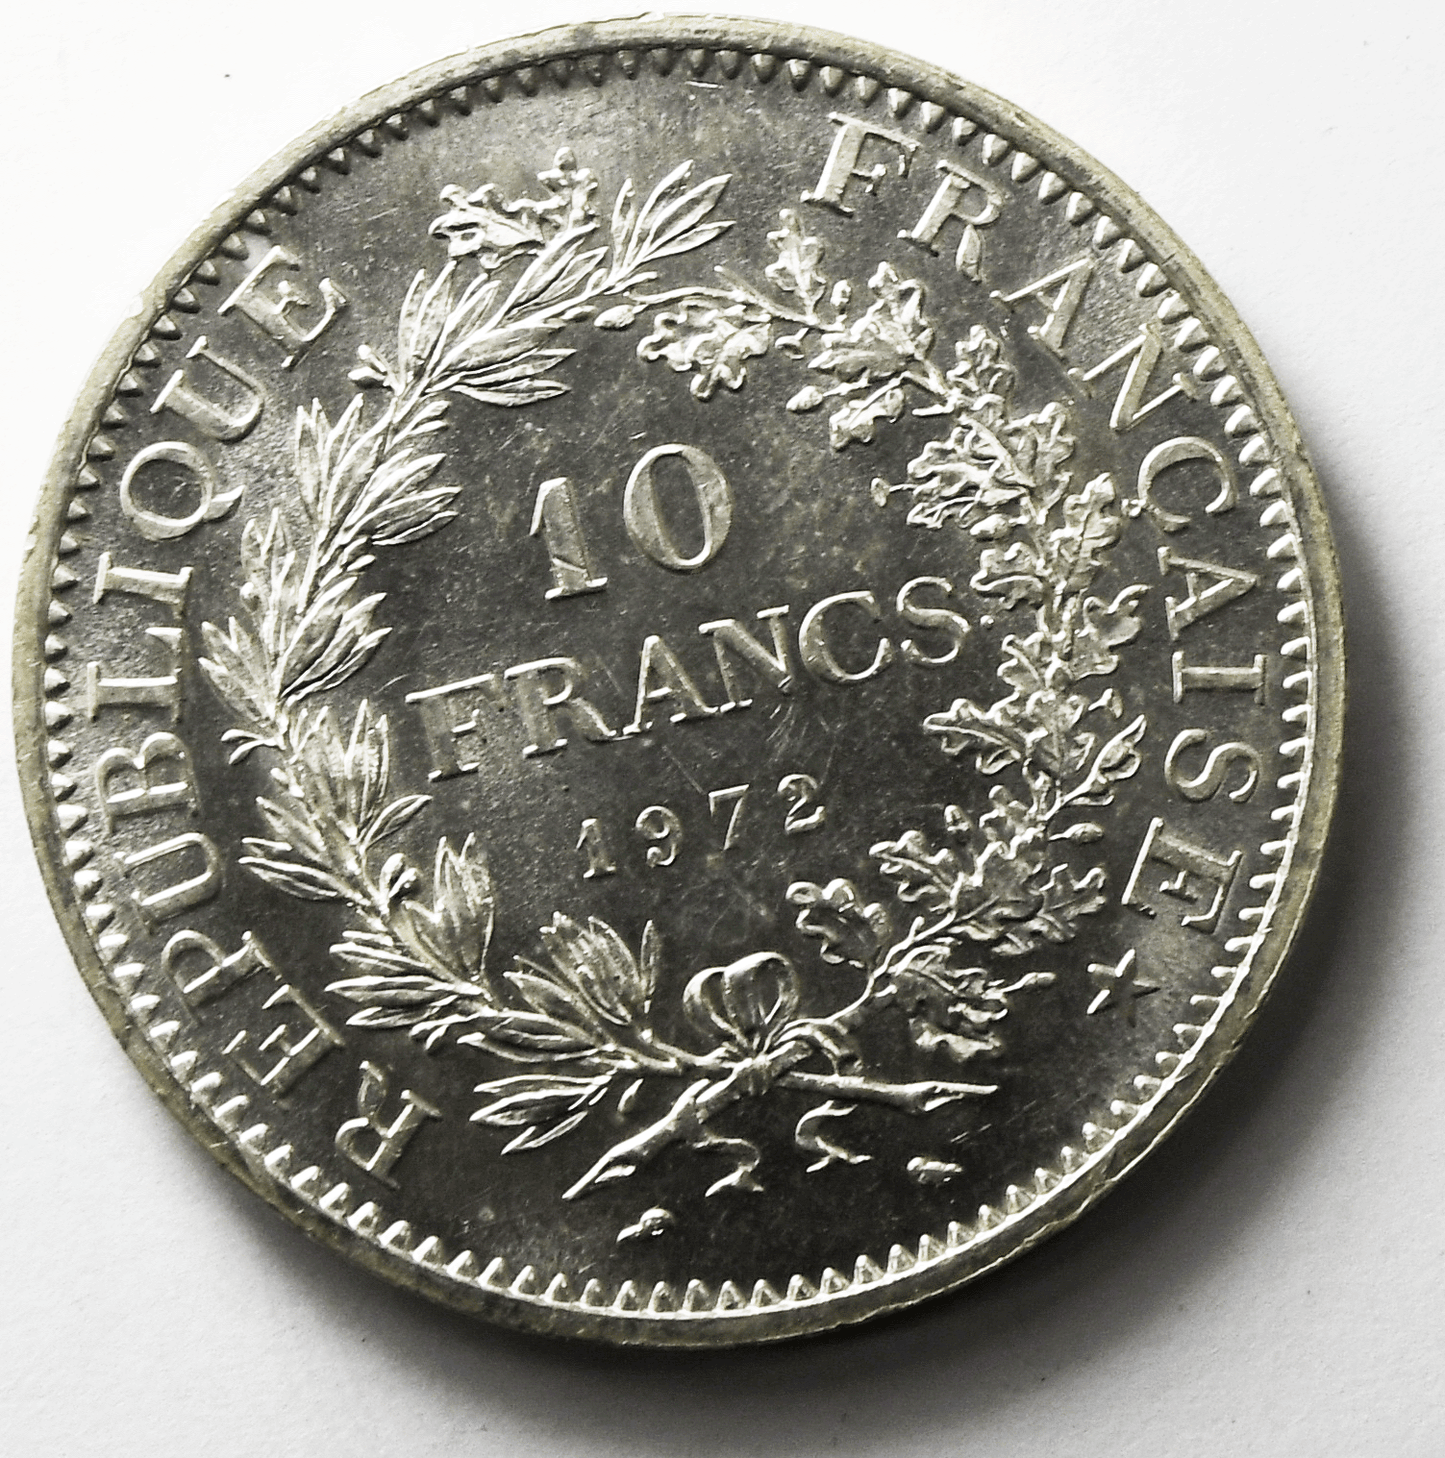 1972 France Proof Like 10 Ten Francs Silver Coin KM# 932